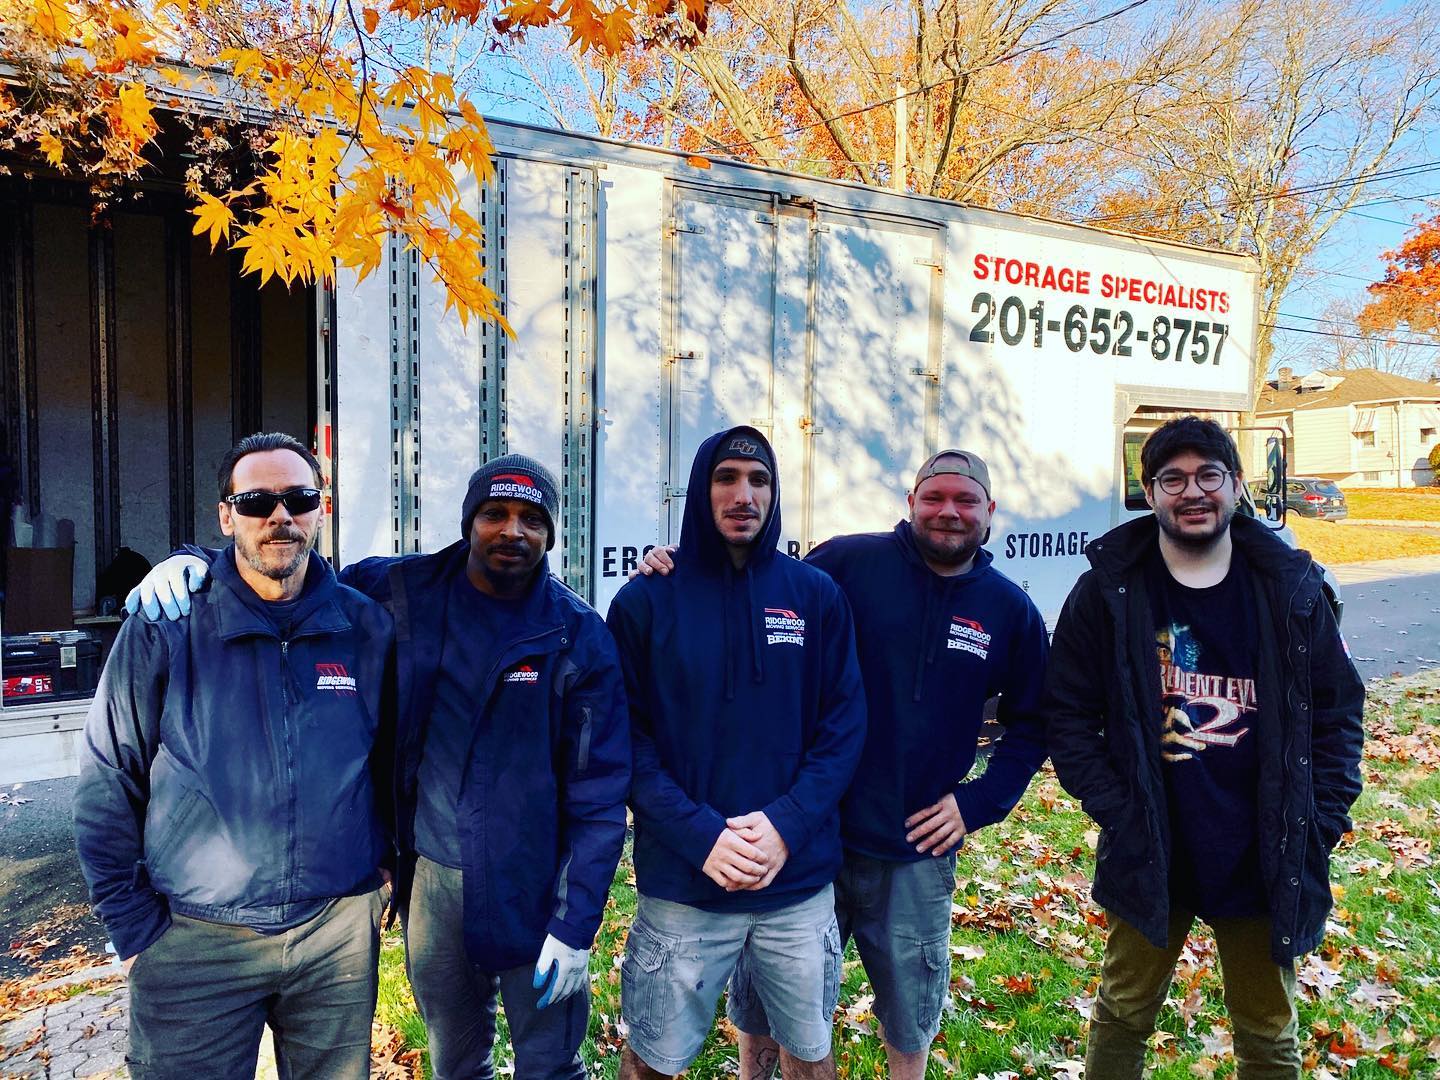 Another great move in Emerson!
…
#ridgewoodmoving #movingcompany #realestate #realtor #realtorlife #wbe #womanownedbusiness #ridgewood #emersonnj #nj #bergencounty #realtorsofinstagram #realtorsofinstagram #movingcompanynj